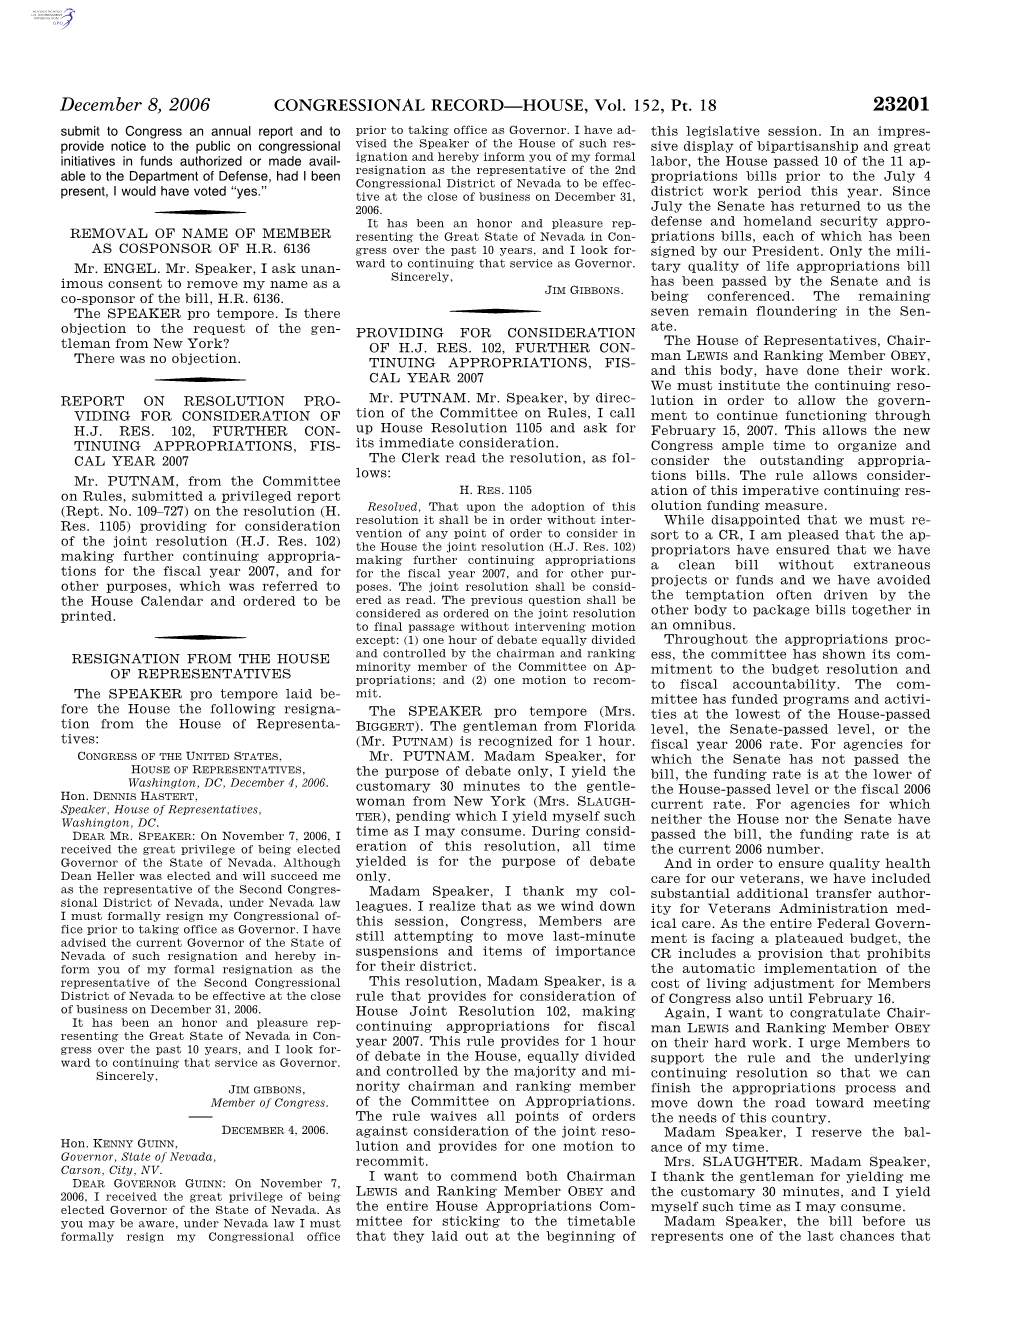 CONGRESSIONAL RECORD—HOUSE, Vol. 152, Pt. 18 23201 Submit to Congress an Annual Report and to Prior to Taking Office As Governor